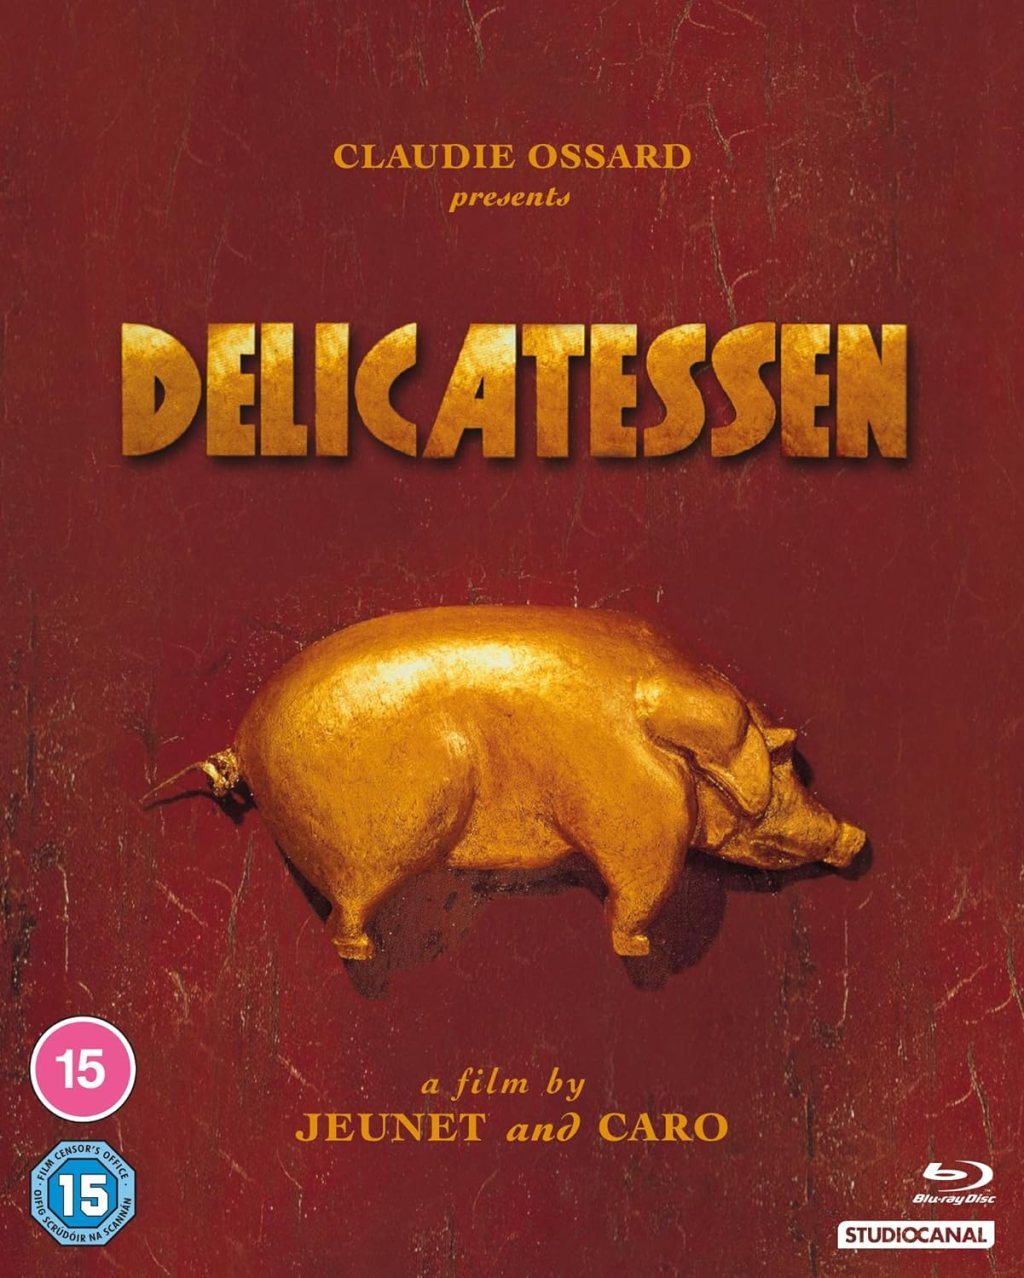 Win a copy of the cult classic Delicatessen on Blu-ray! **COMPETITION CLOSED**